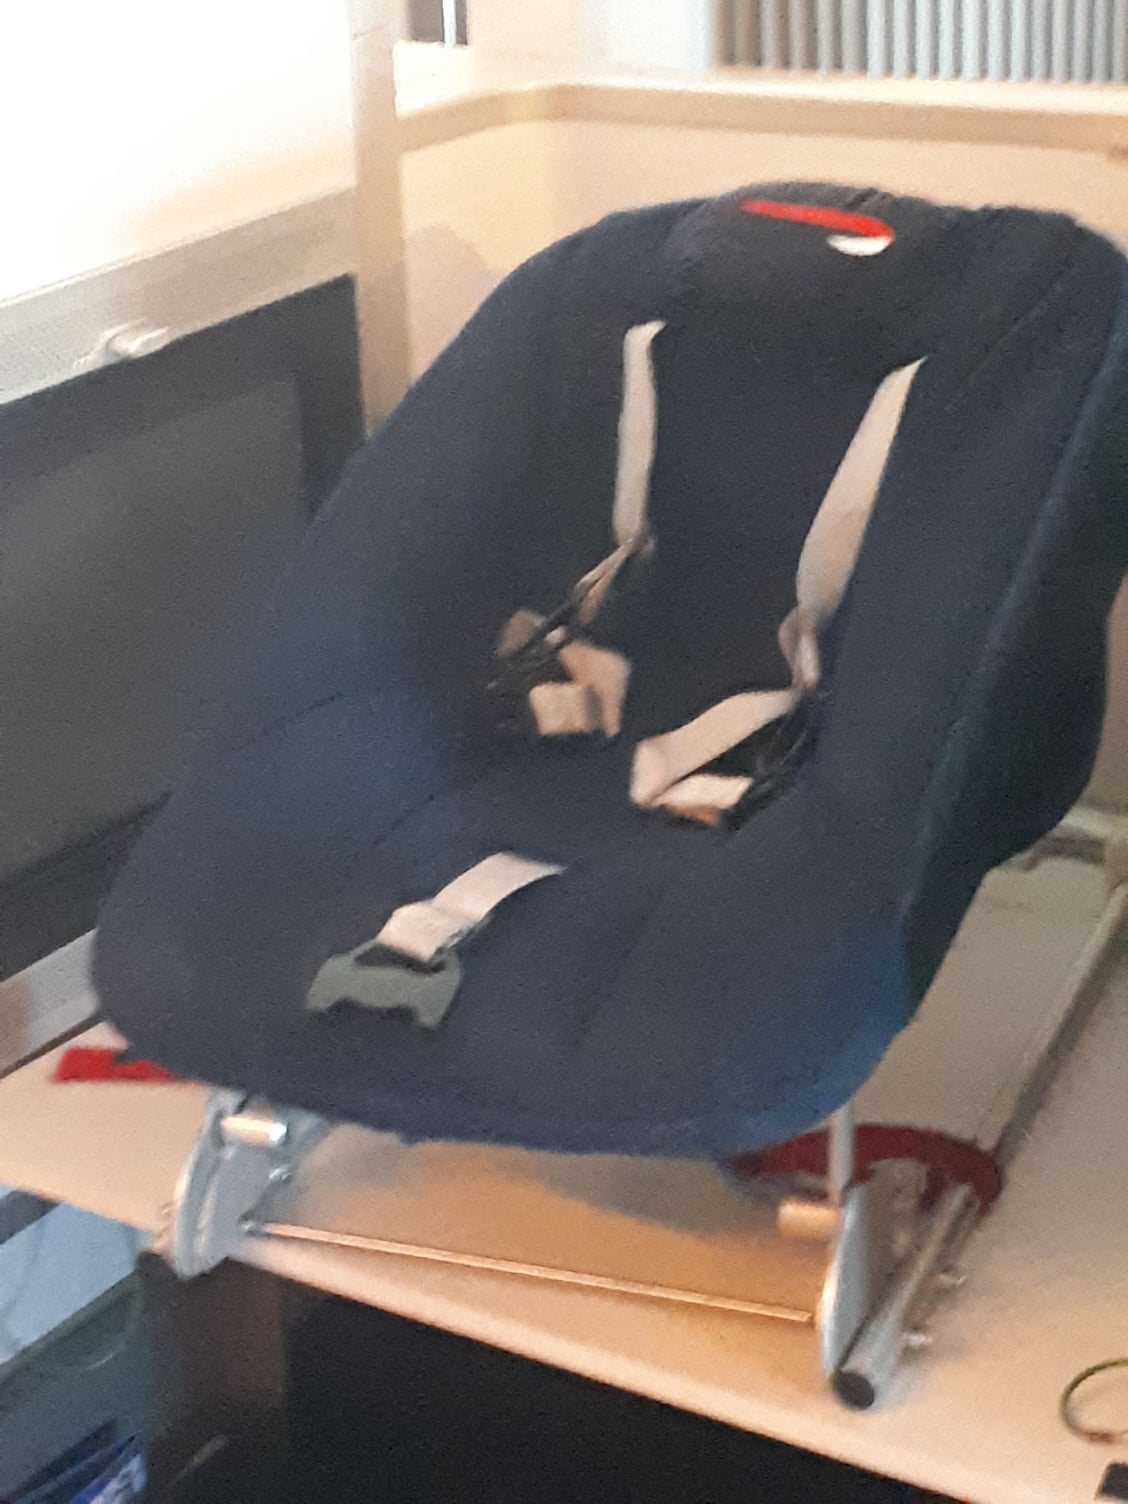 Do babies have to go in bassinet seats? - FlyerTalk Forums